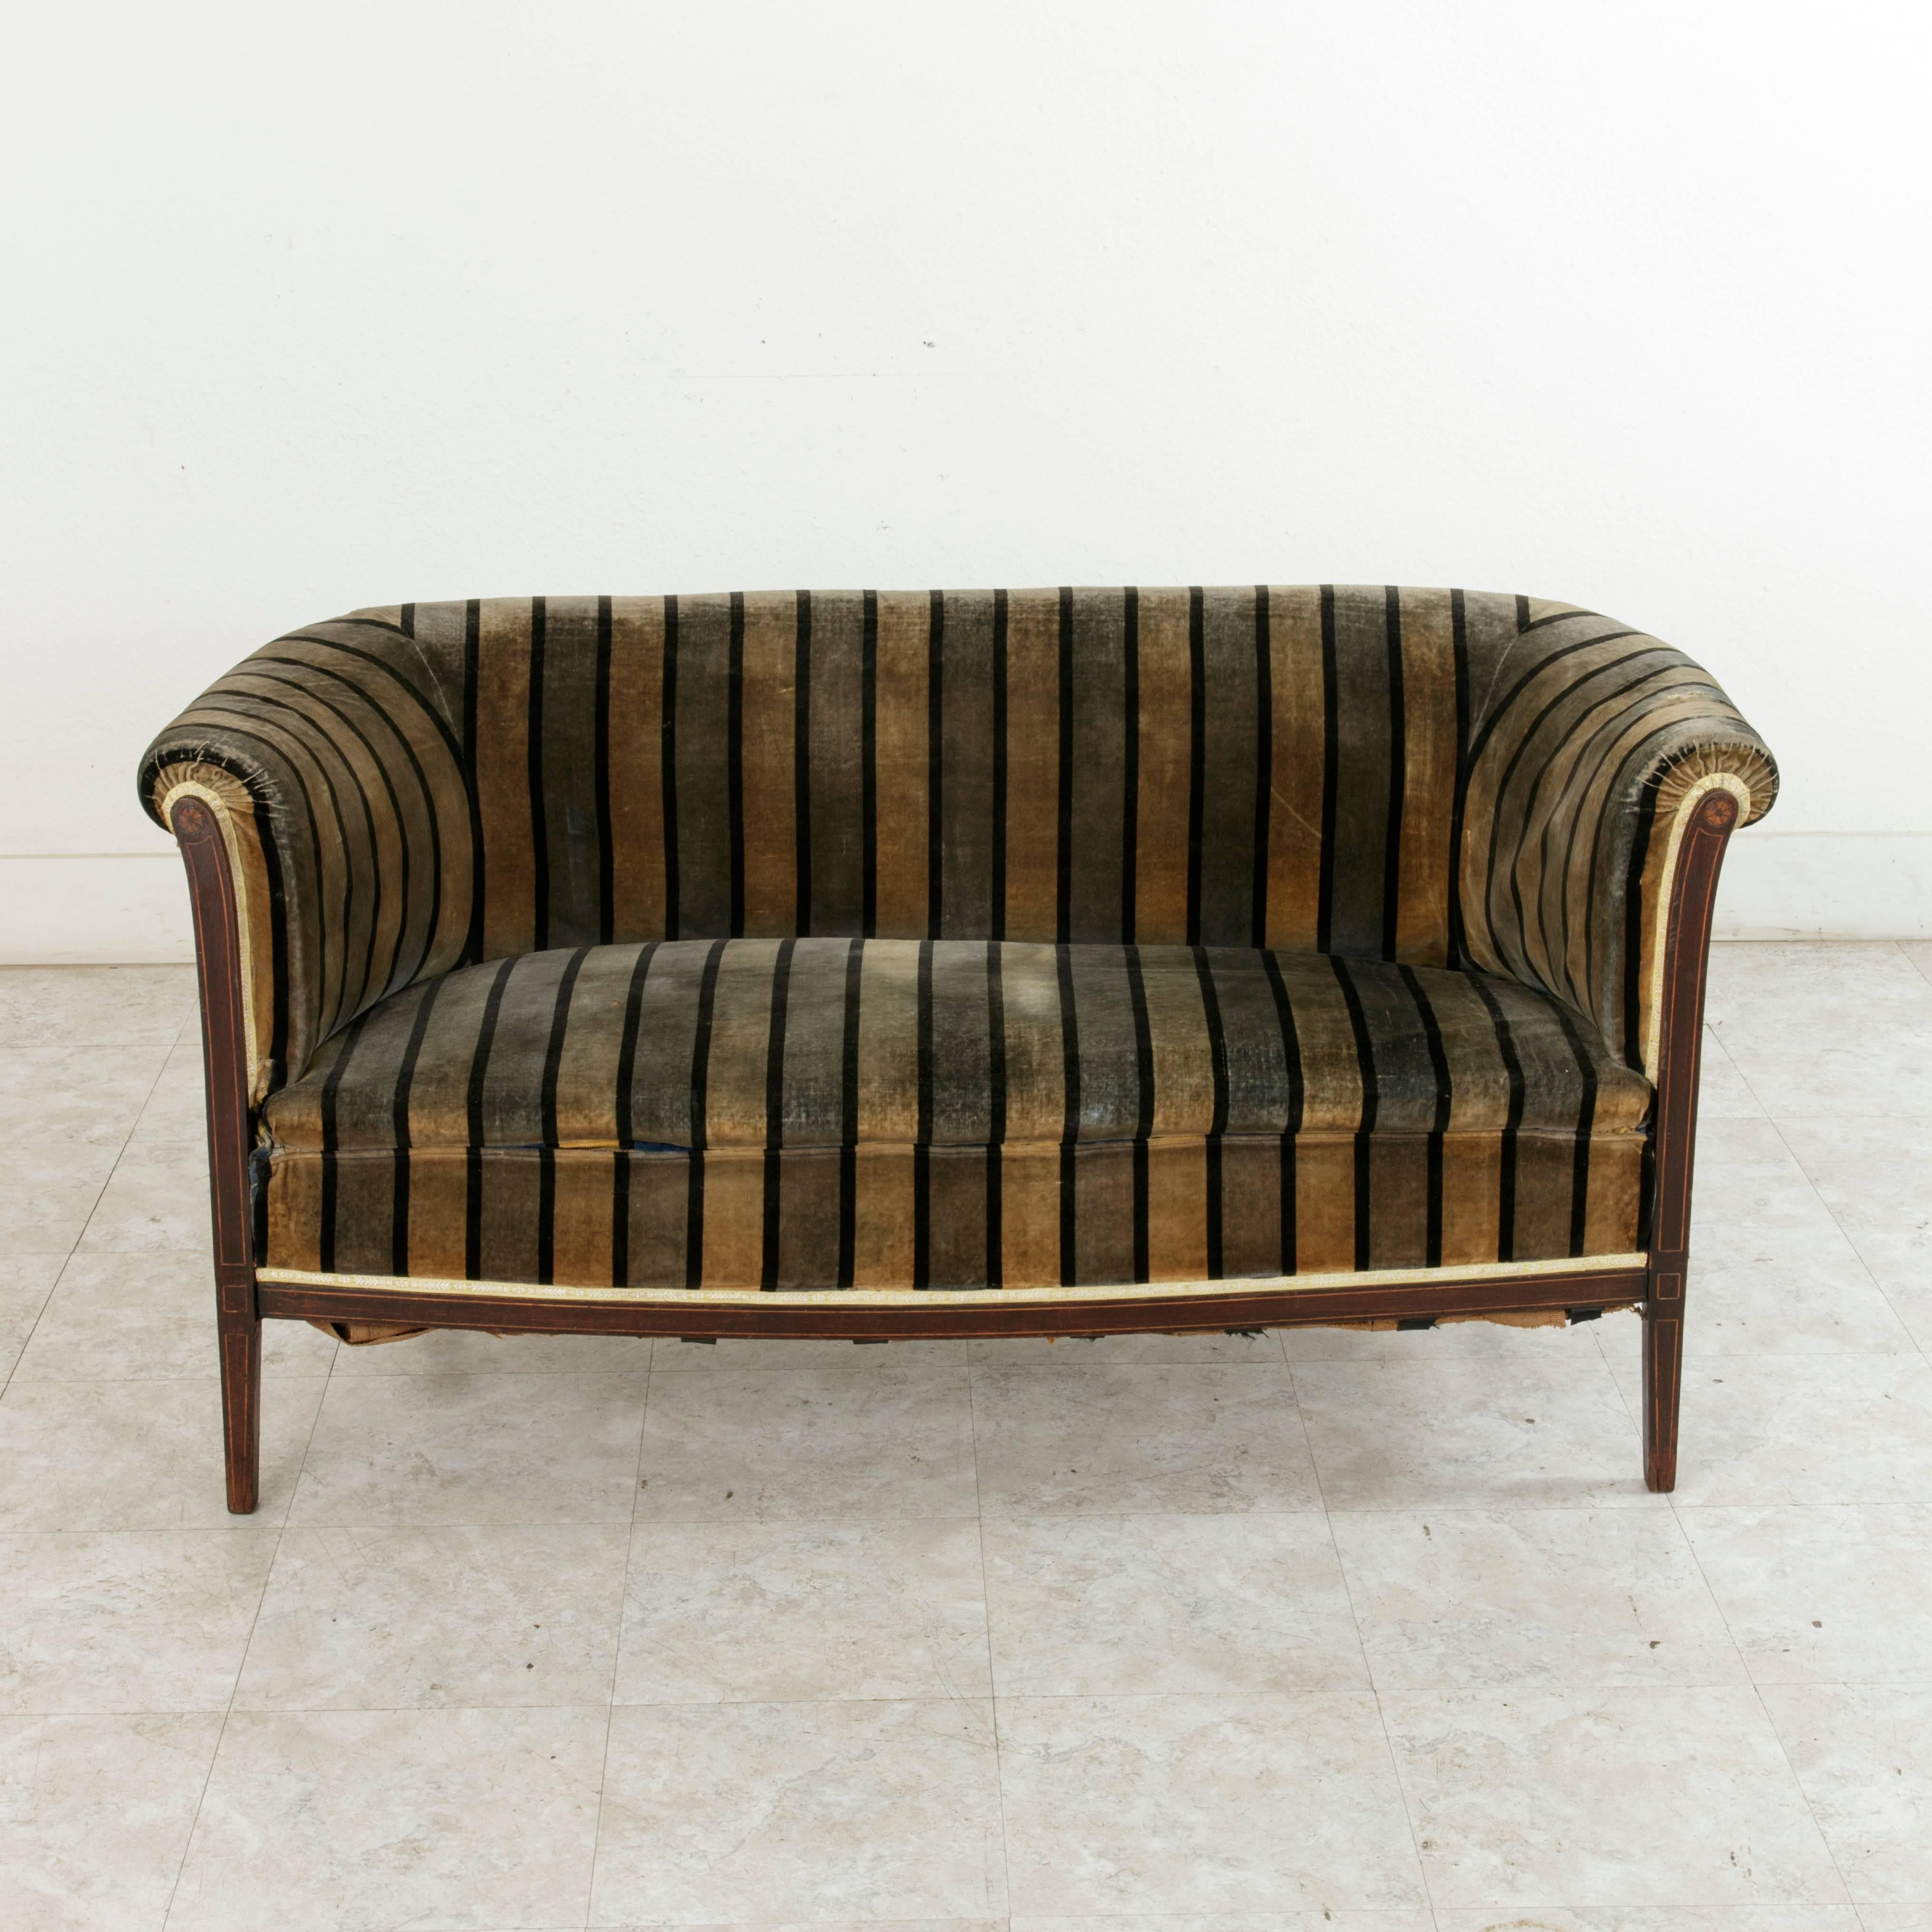 A rare find in French Art Deco period pieces! This chic small-scale settee or sofa has the Classic lines of the furniture of the period but is set apart by its unusual details. Its mahogany frame is inlaid with lemon wood and sycamore rosettes on